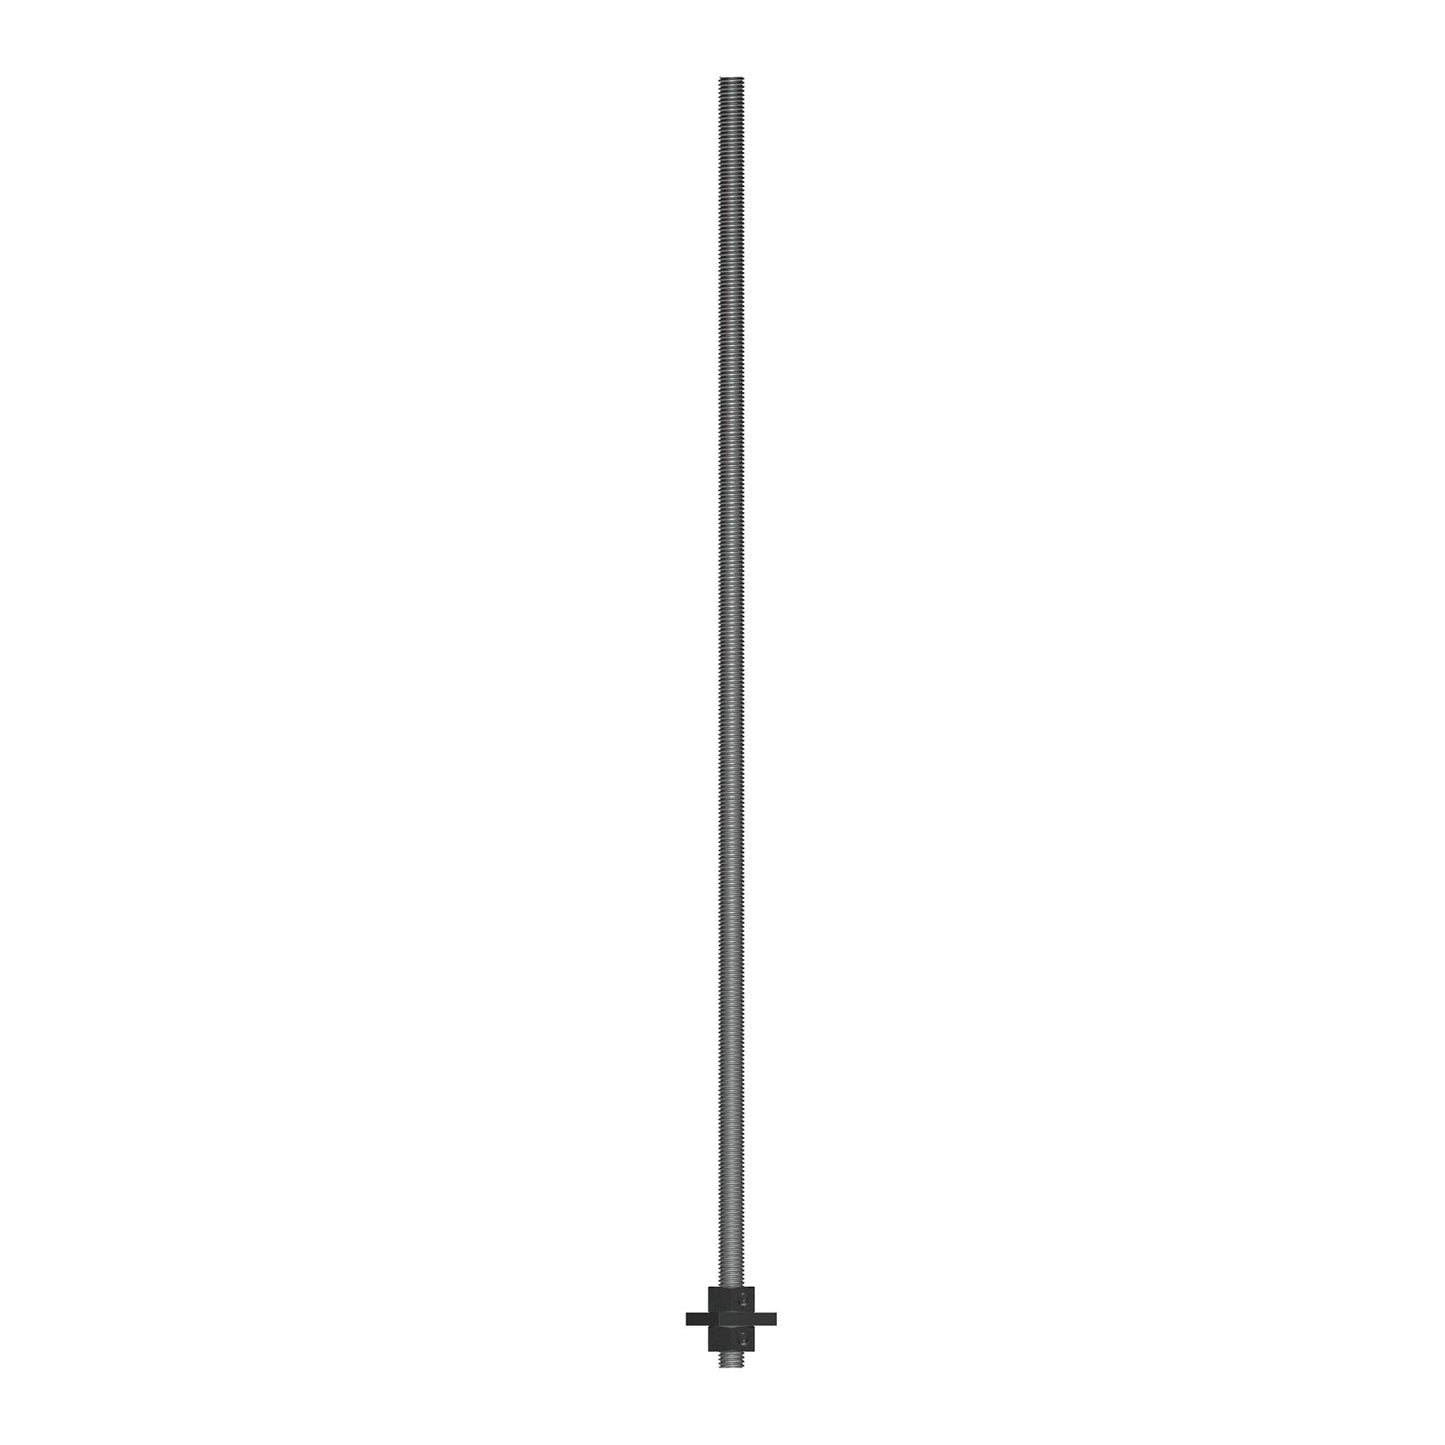 34 inch x 36 inch HighStrength Steel PreAssembled Anchor Bolt